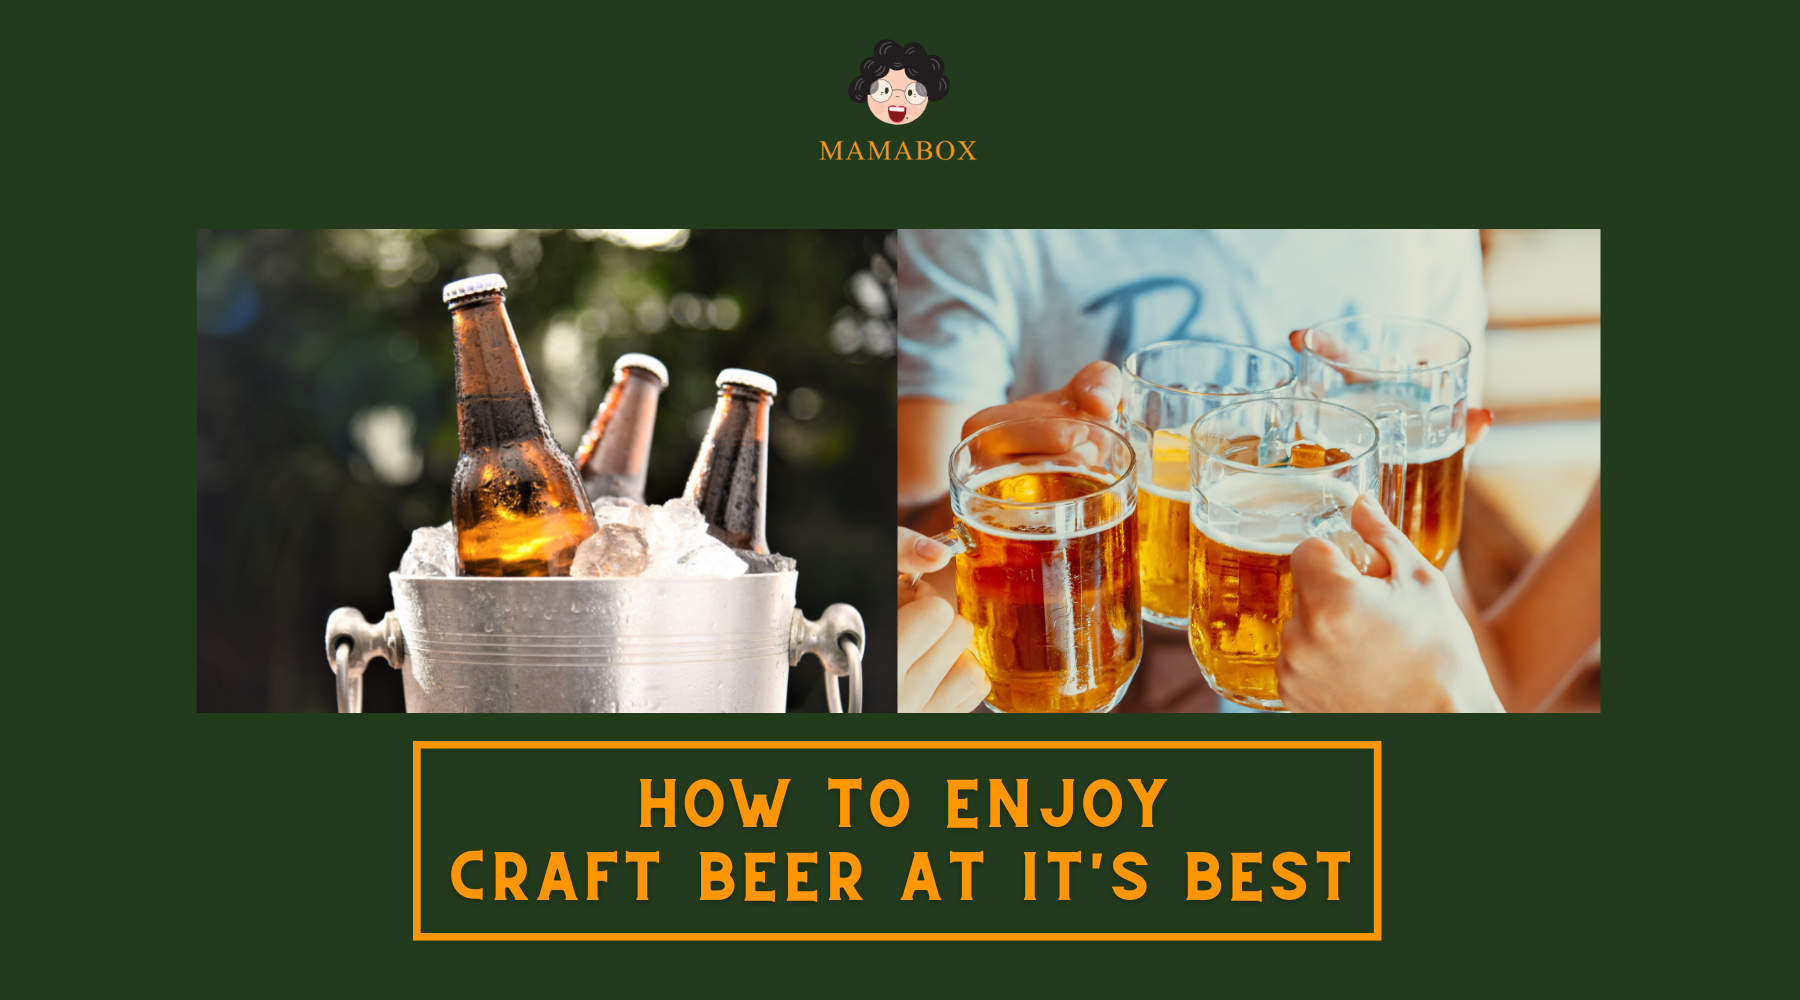 How To Enjoy Craft Beer At It's Best.